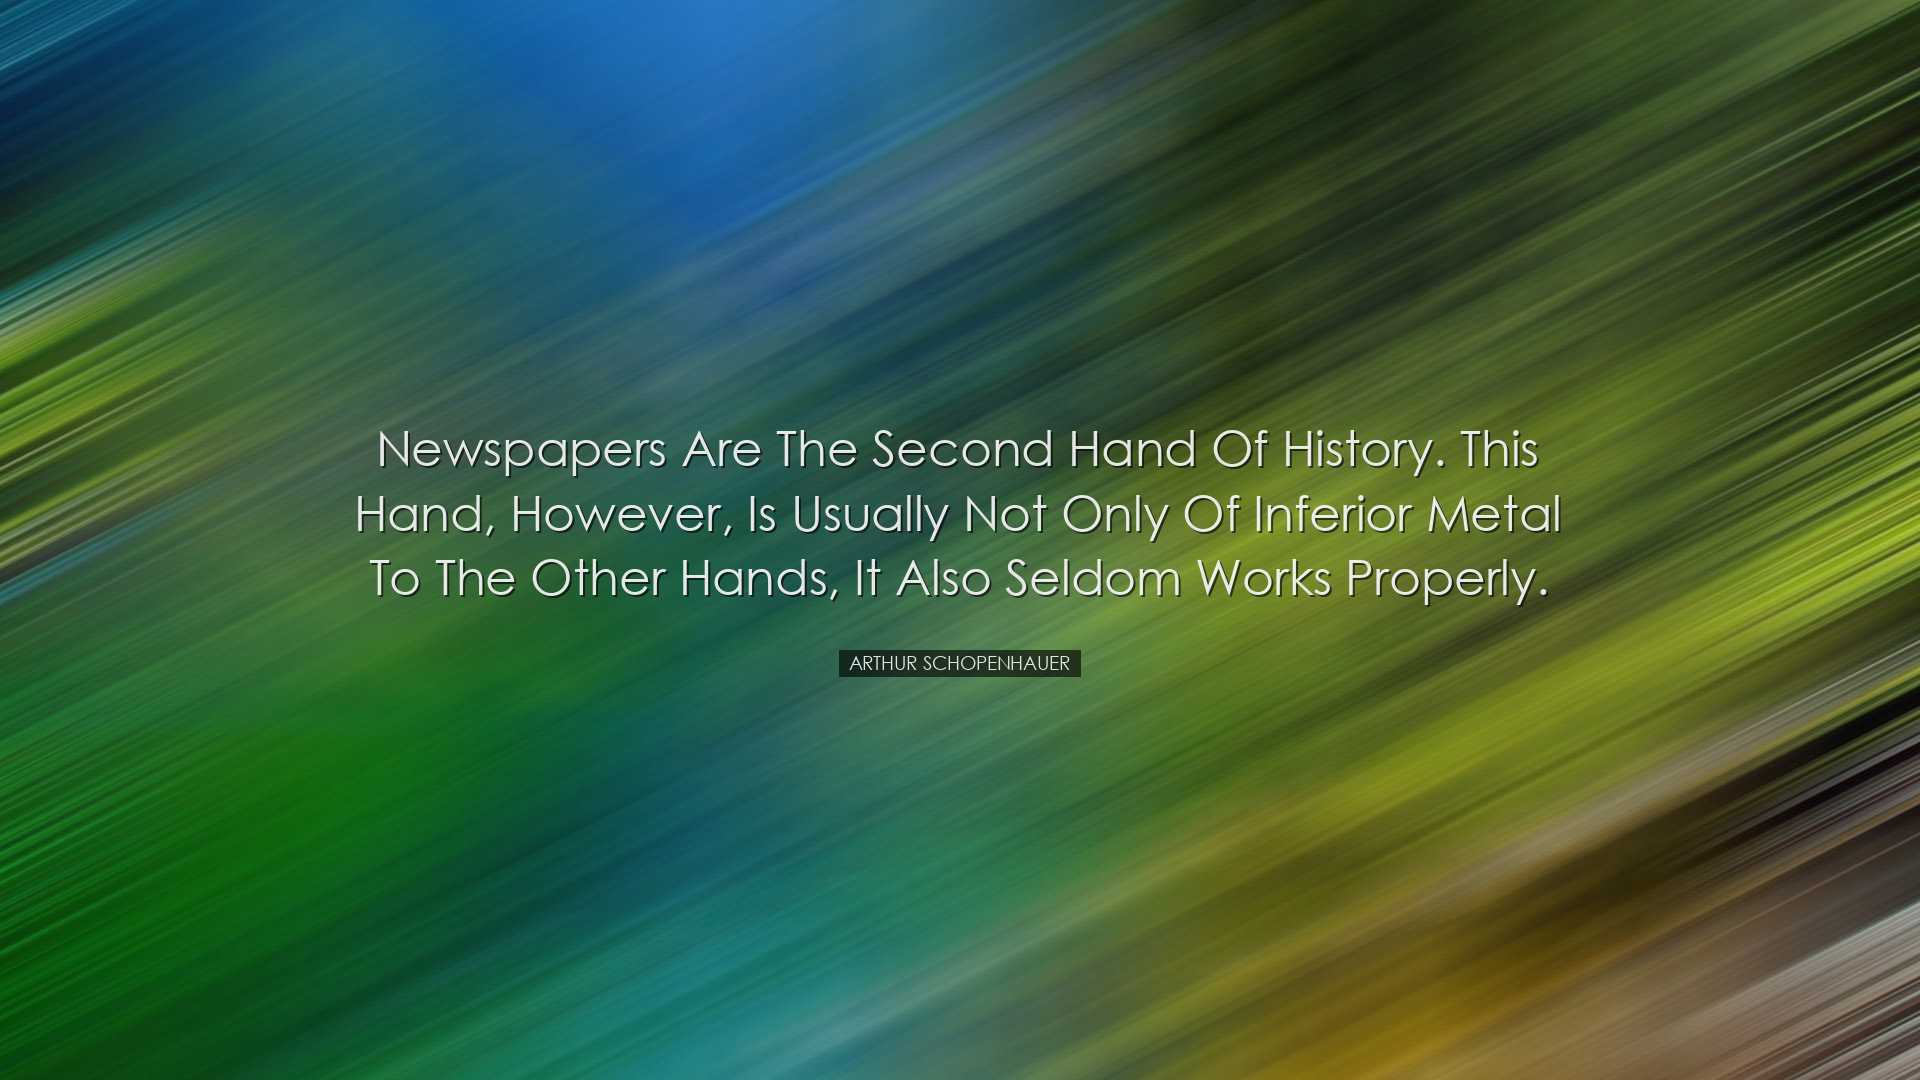 Newspapers are the second hand of history. This hand, however, is